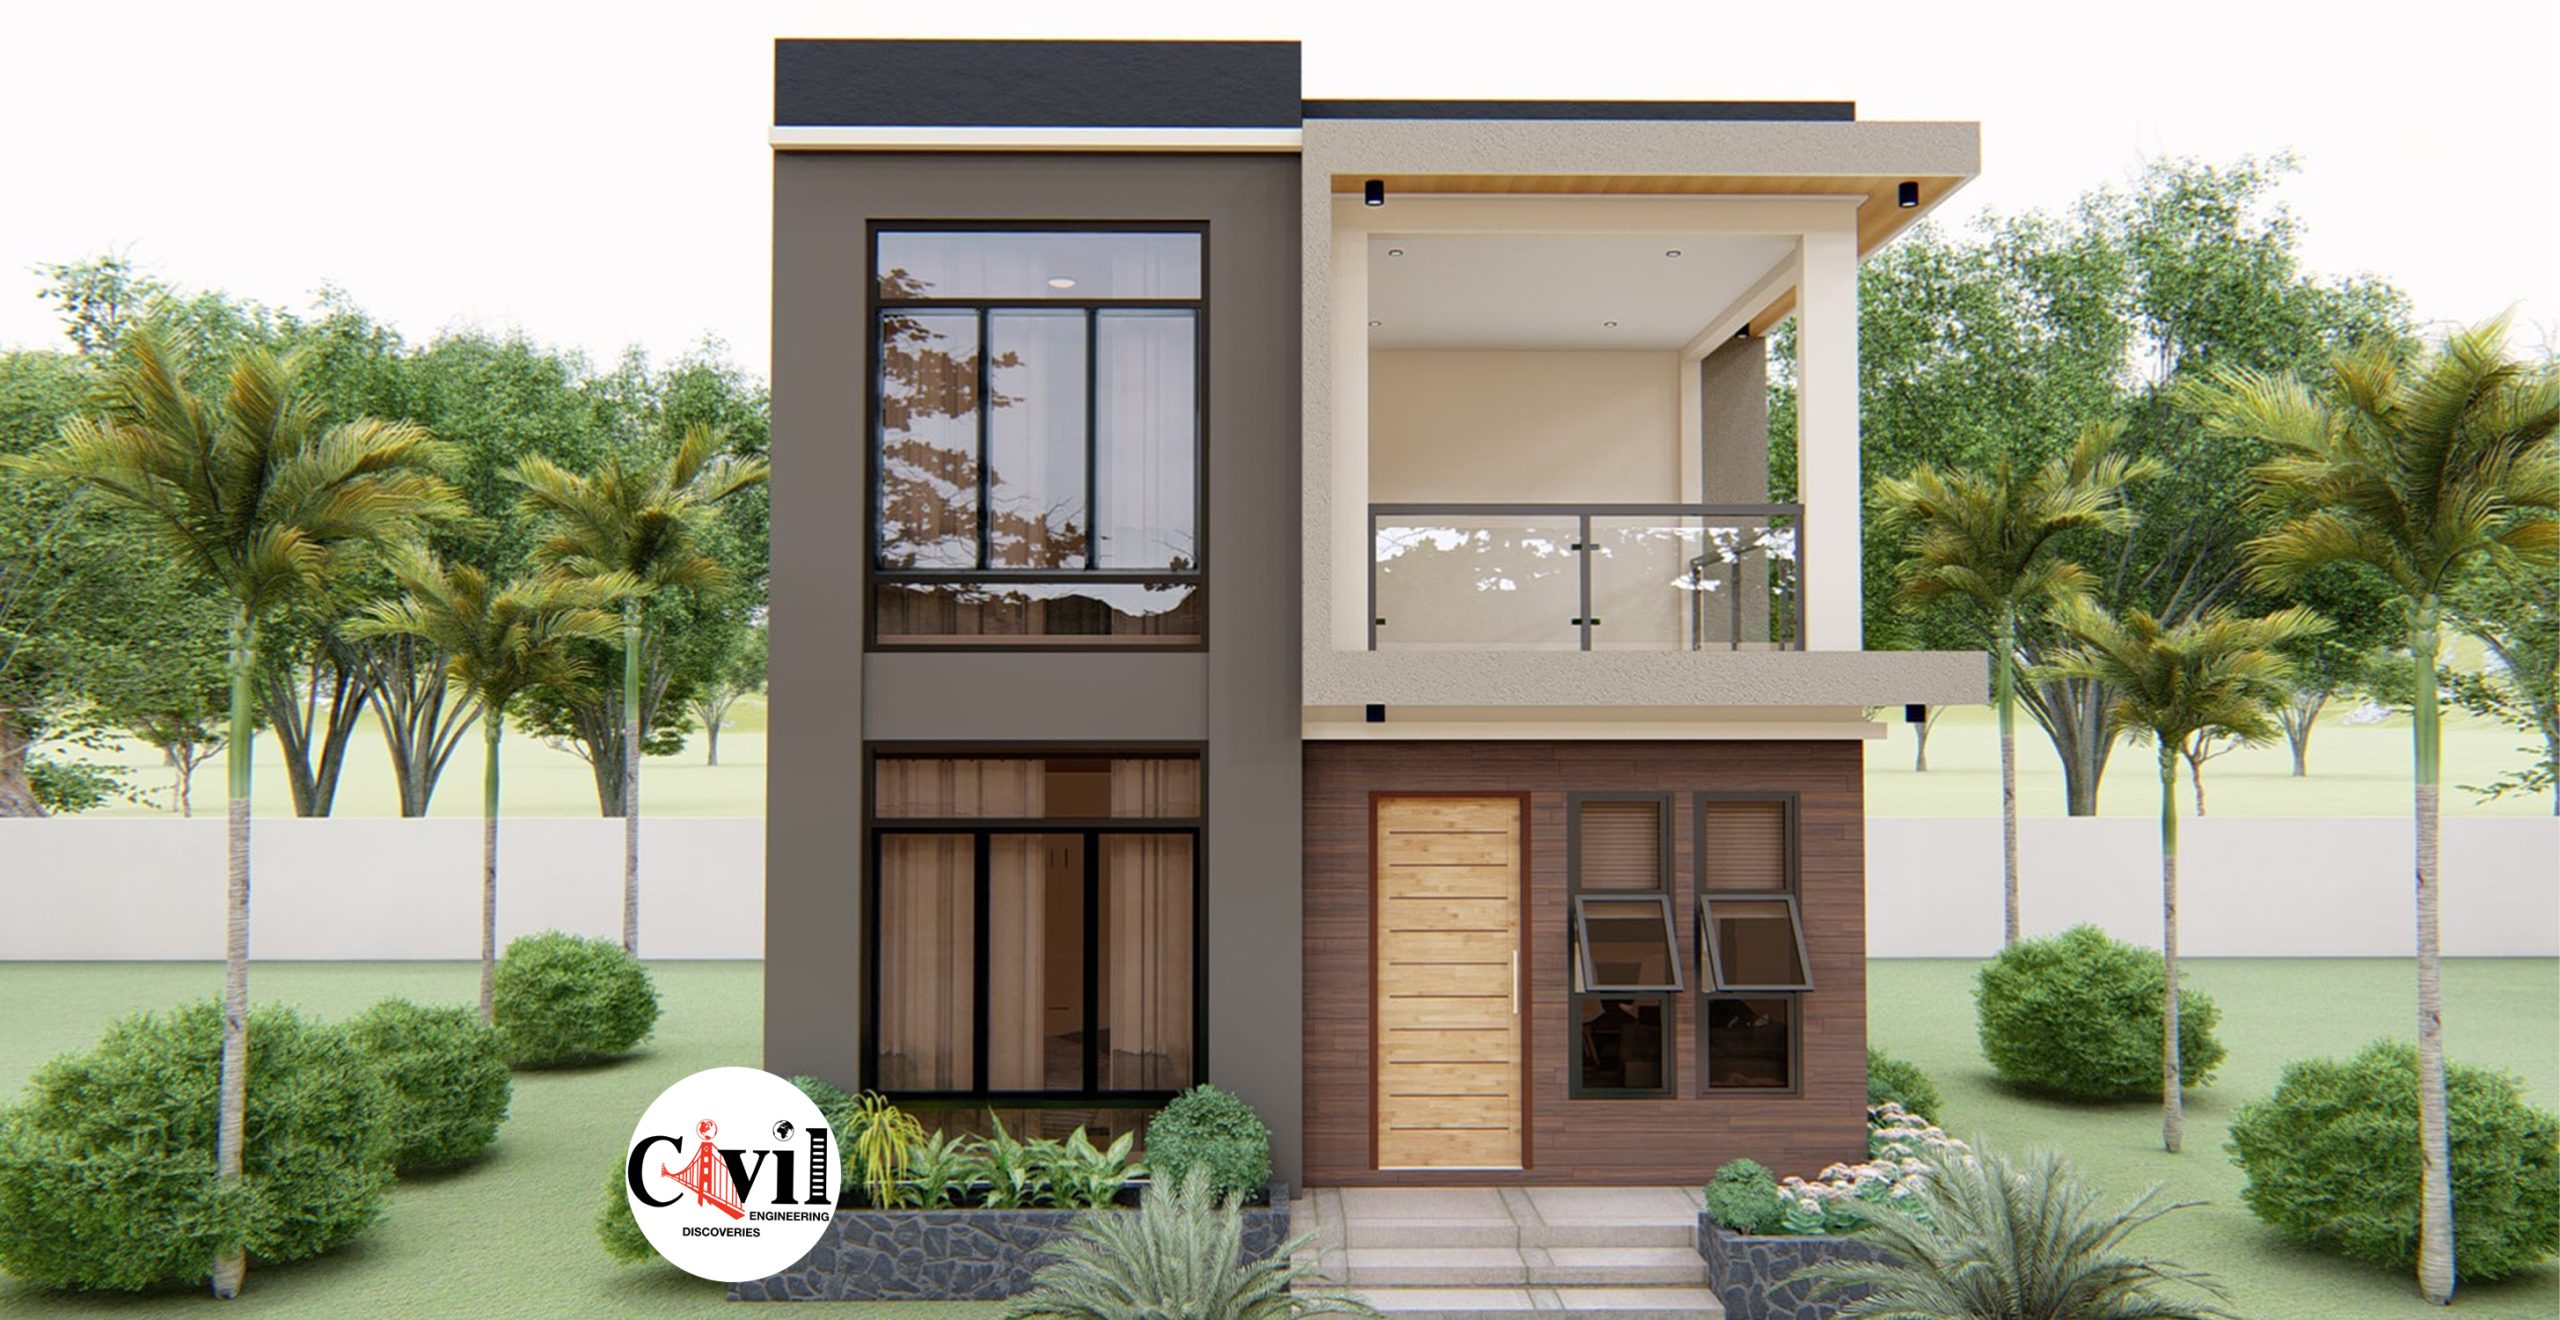 Small 2-Storey House Design 6.0m x 7.0m With 3 Bedrooms - Engineering